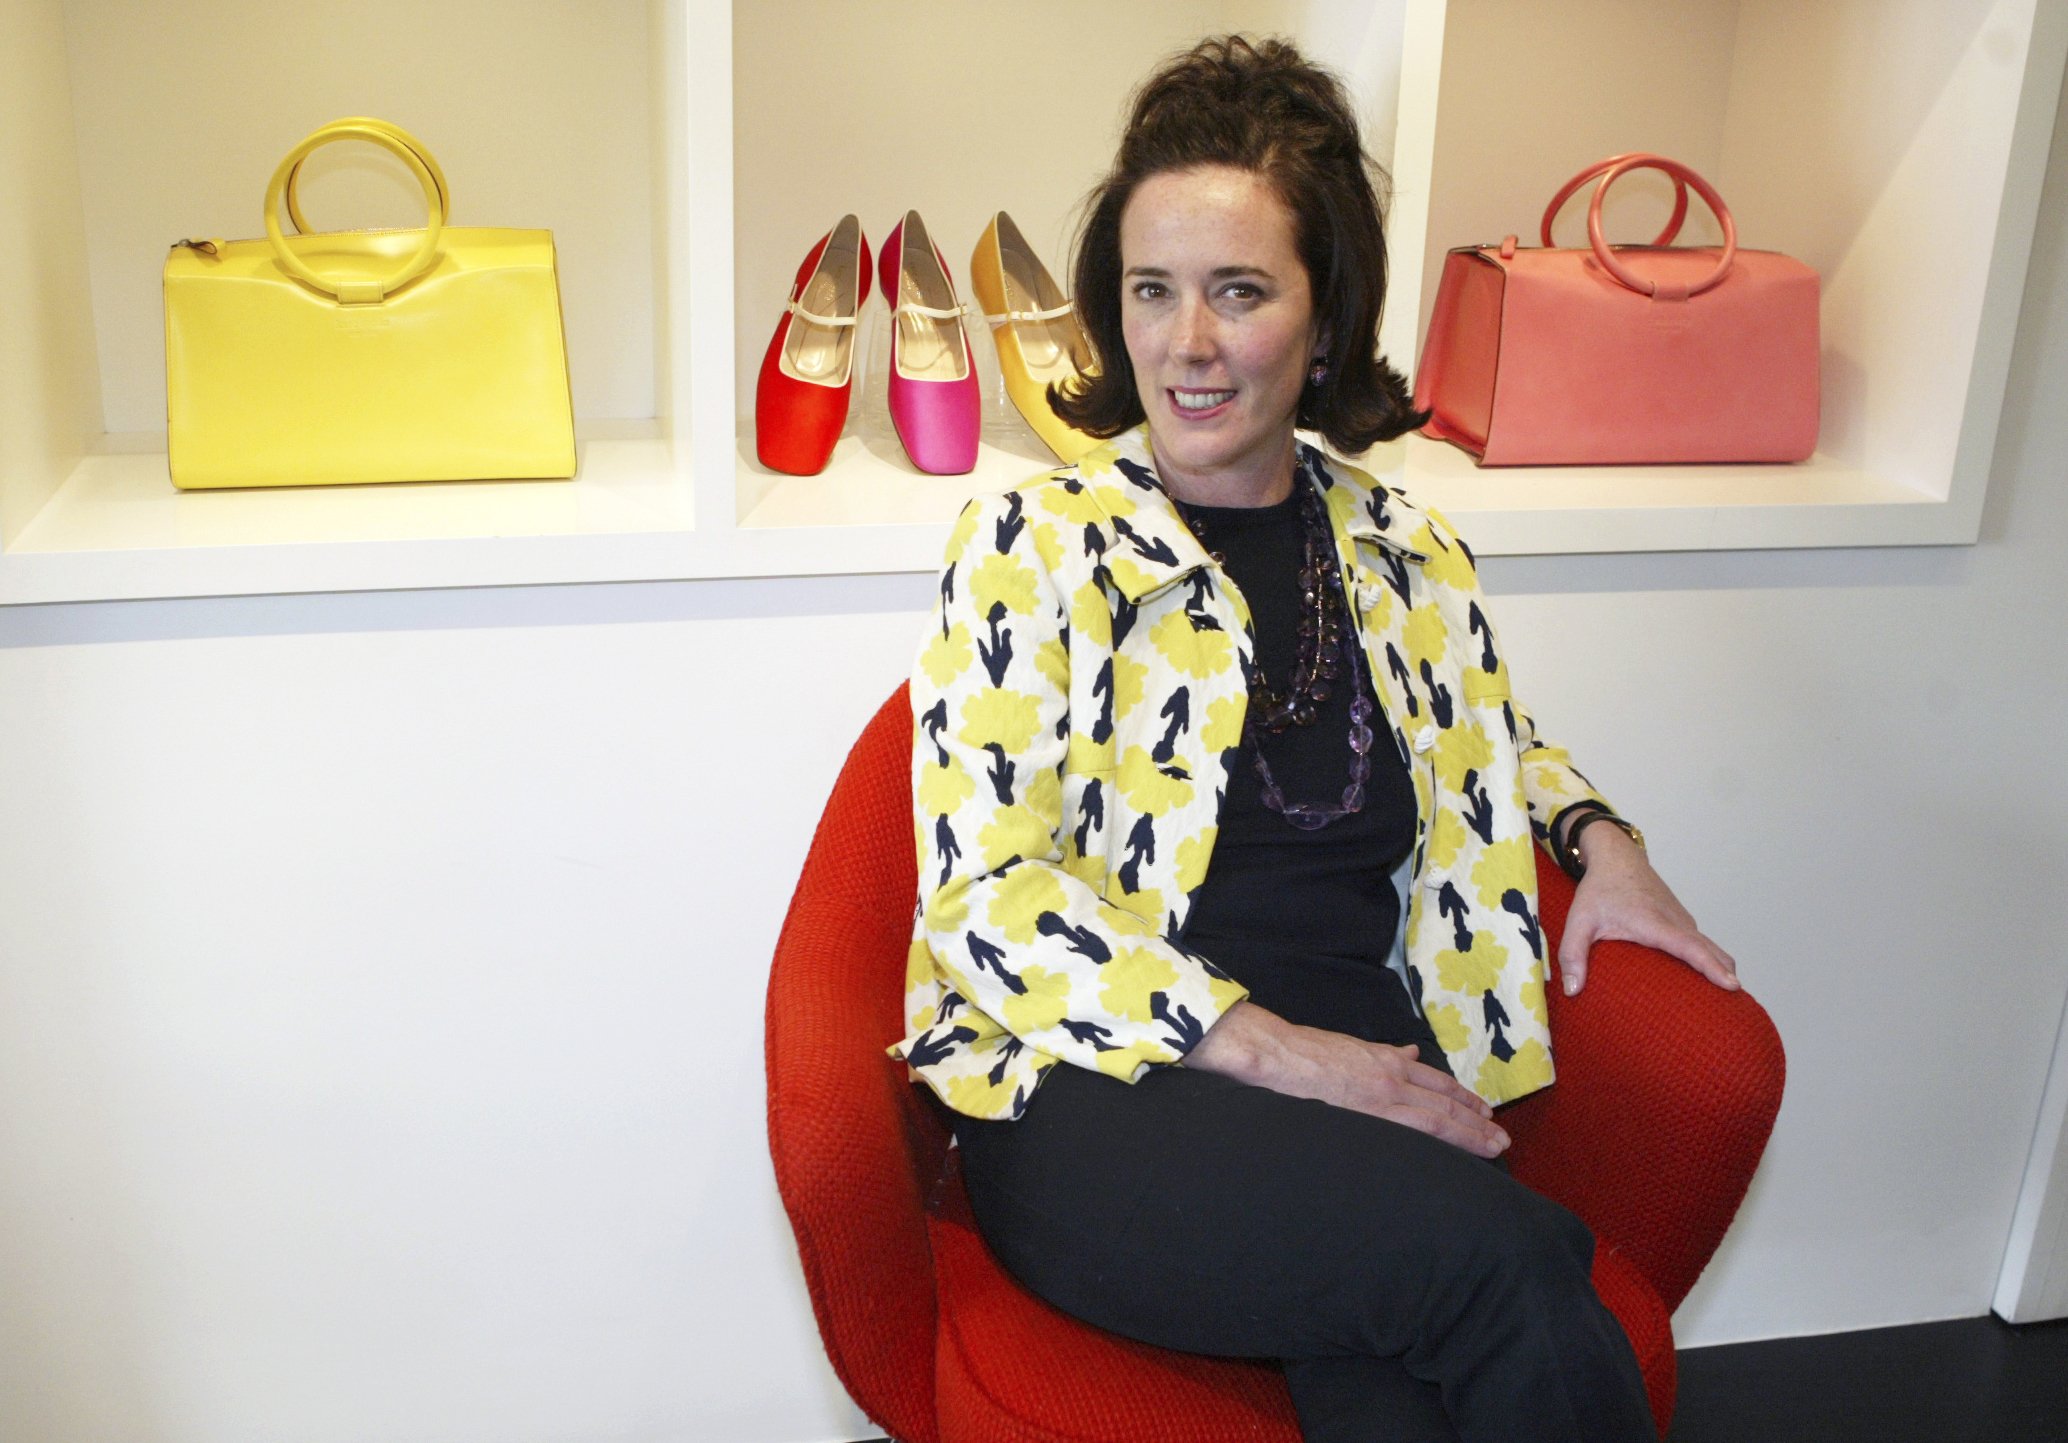 Kate Spade's death ruled a suicide by hanging | AP News